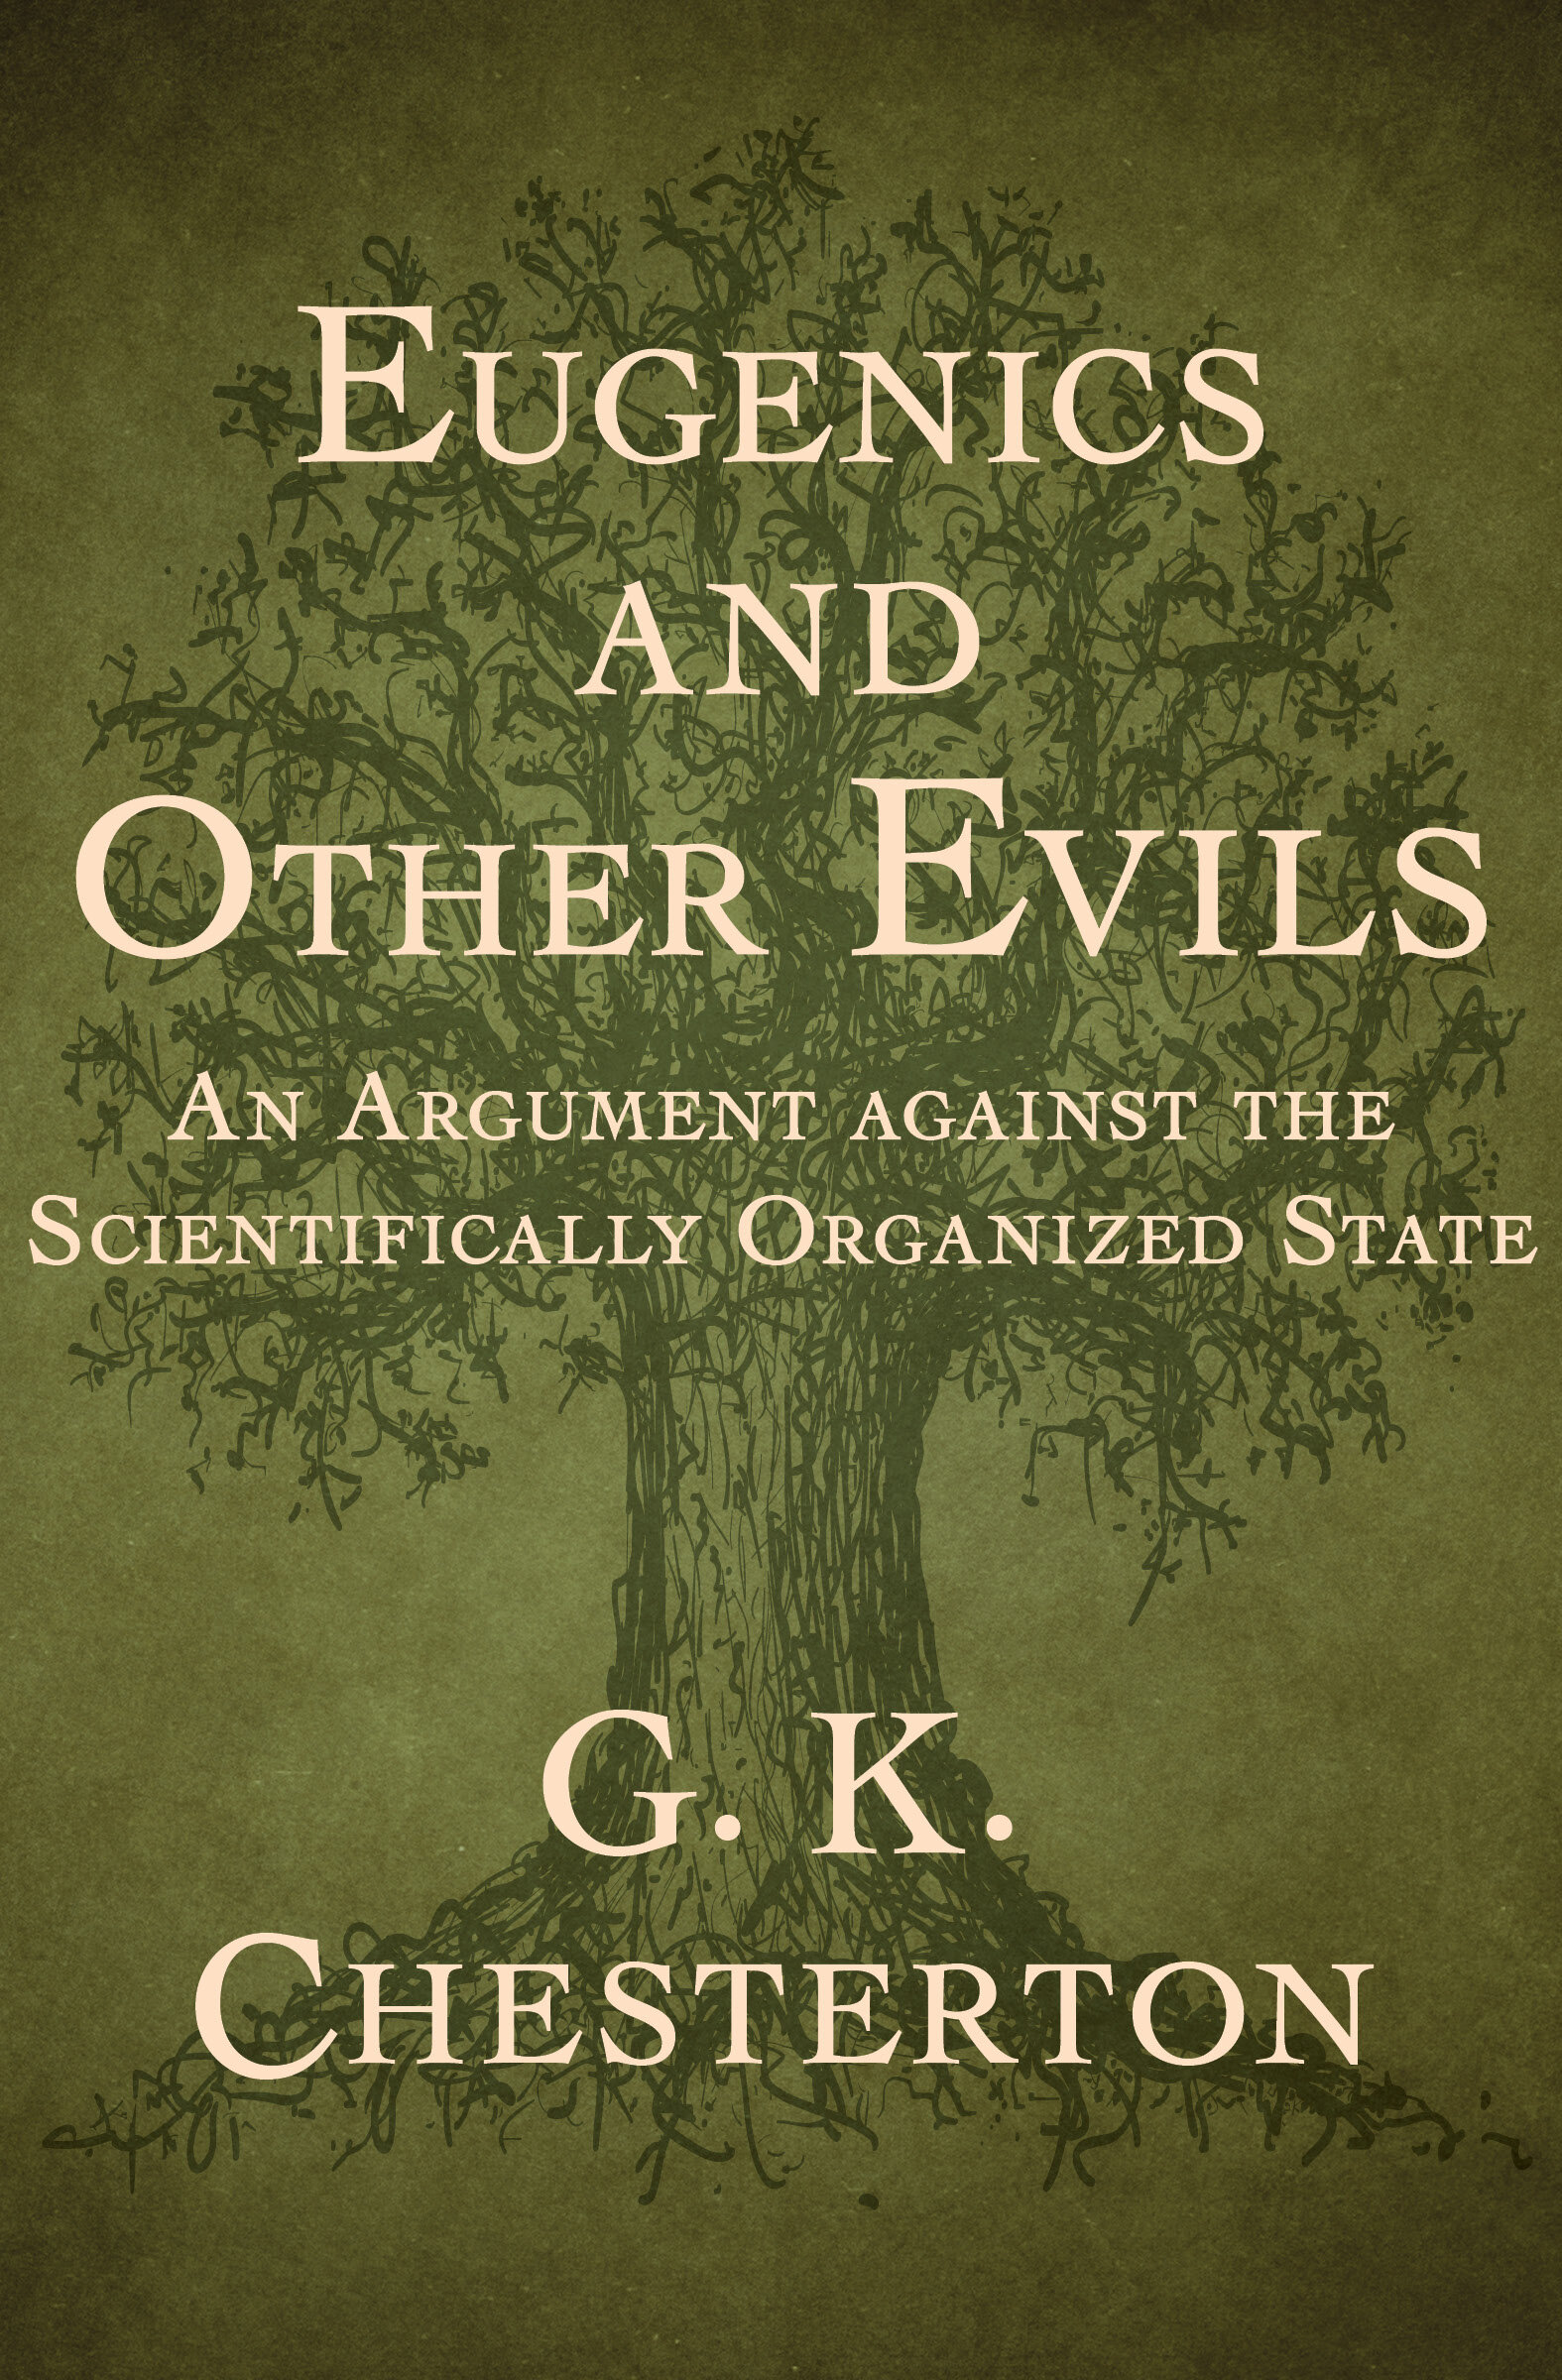 Eugenics and Other Evils: An Argument against the Scientifically Organized State